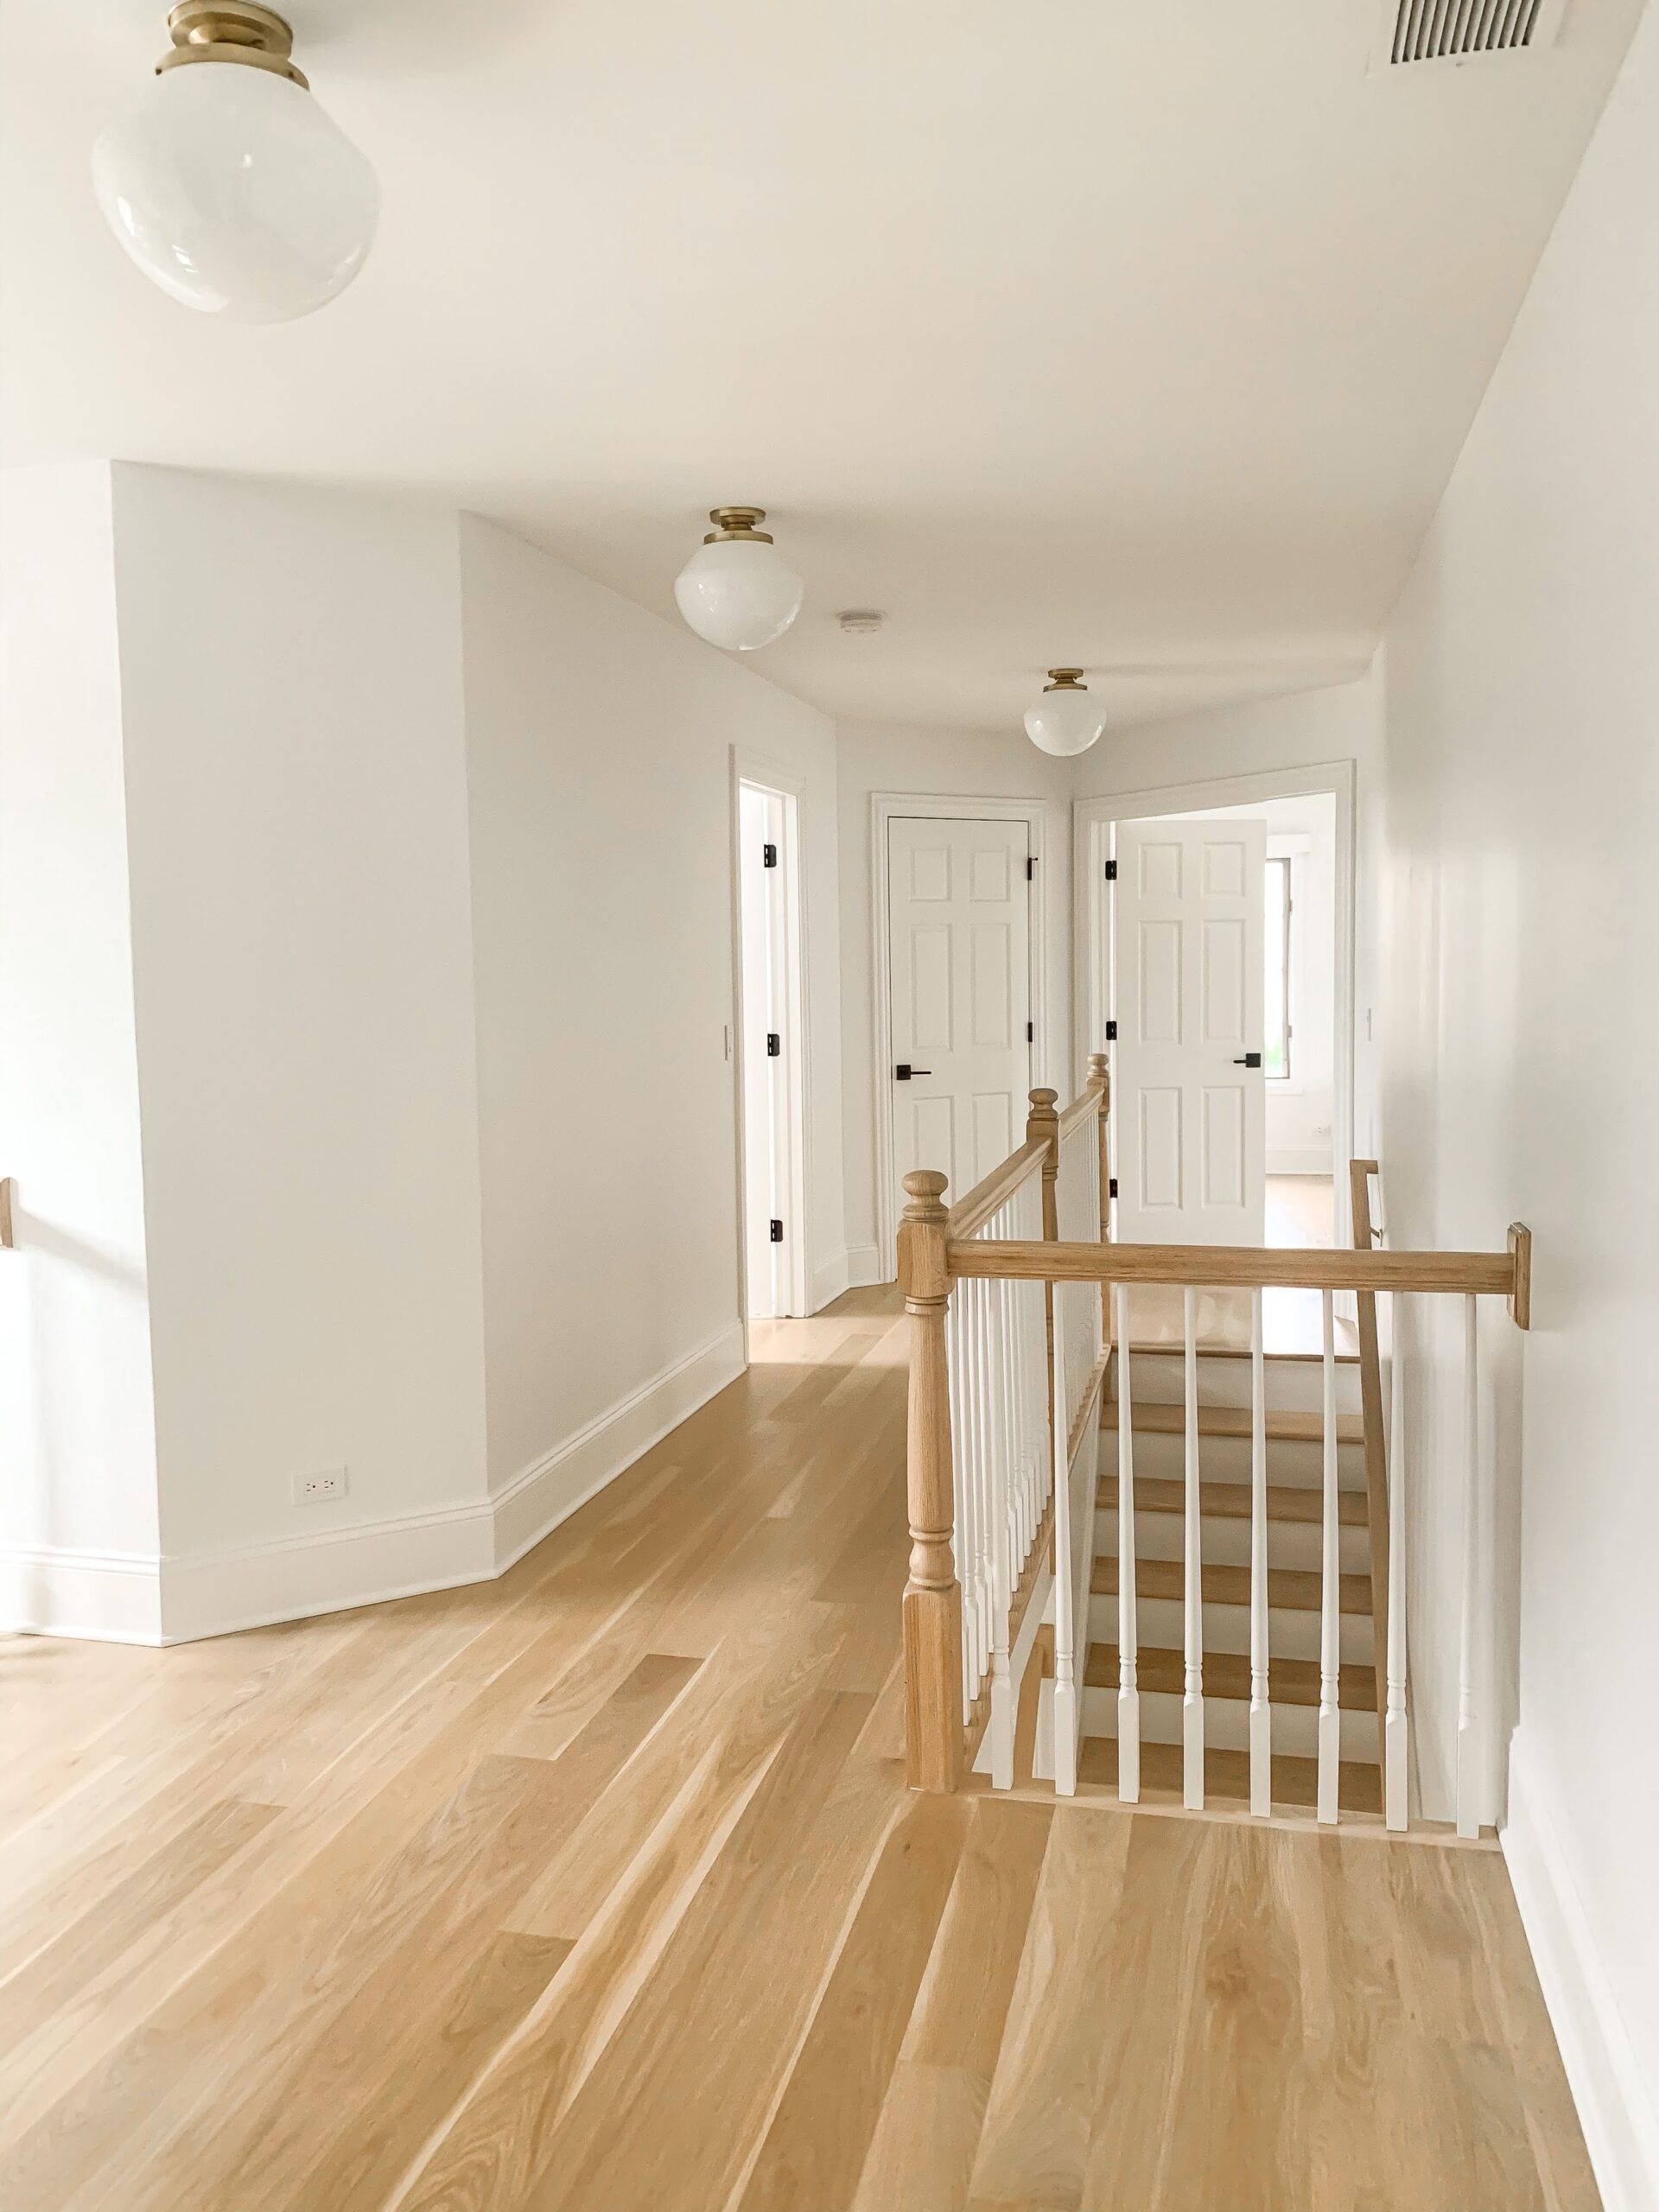 Five reasons to go for engineered maple
floors